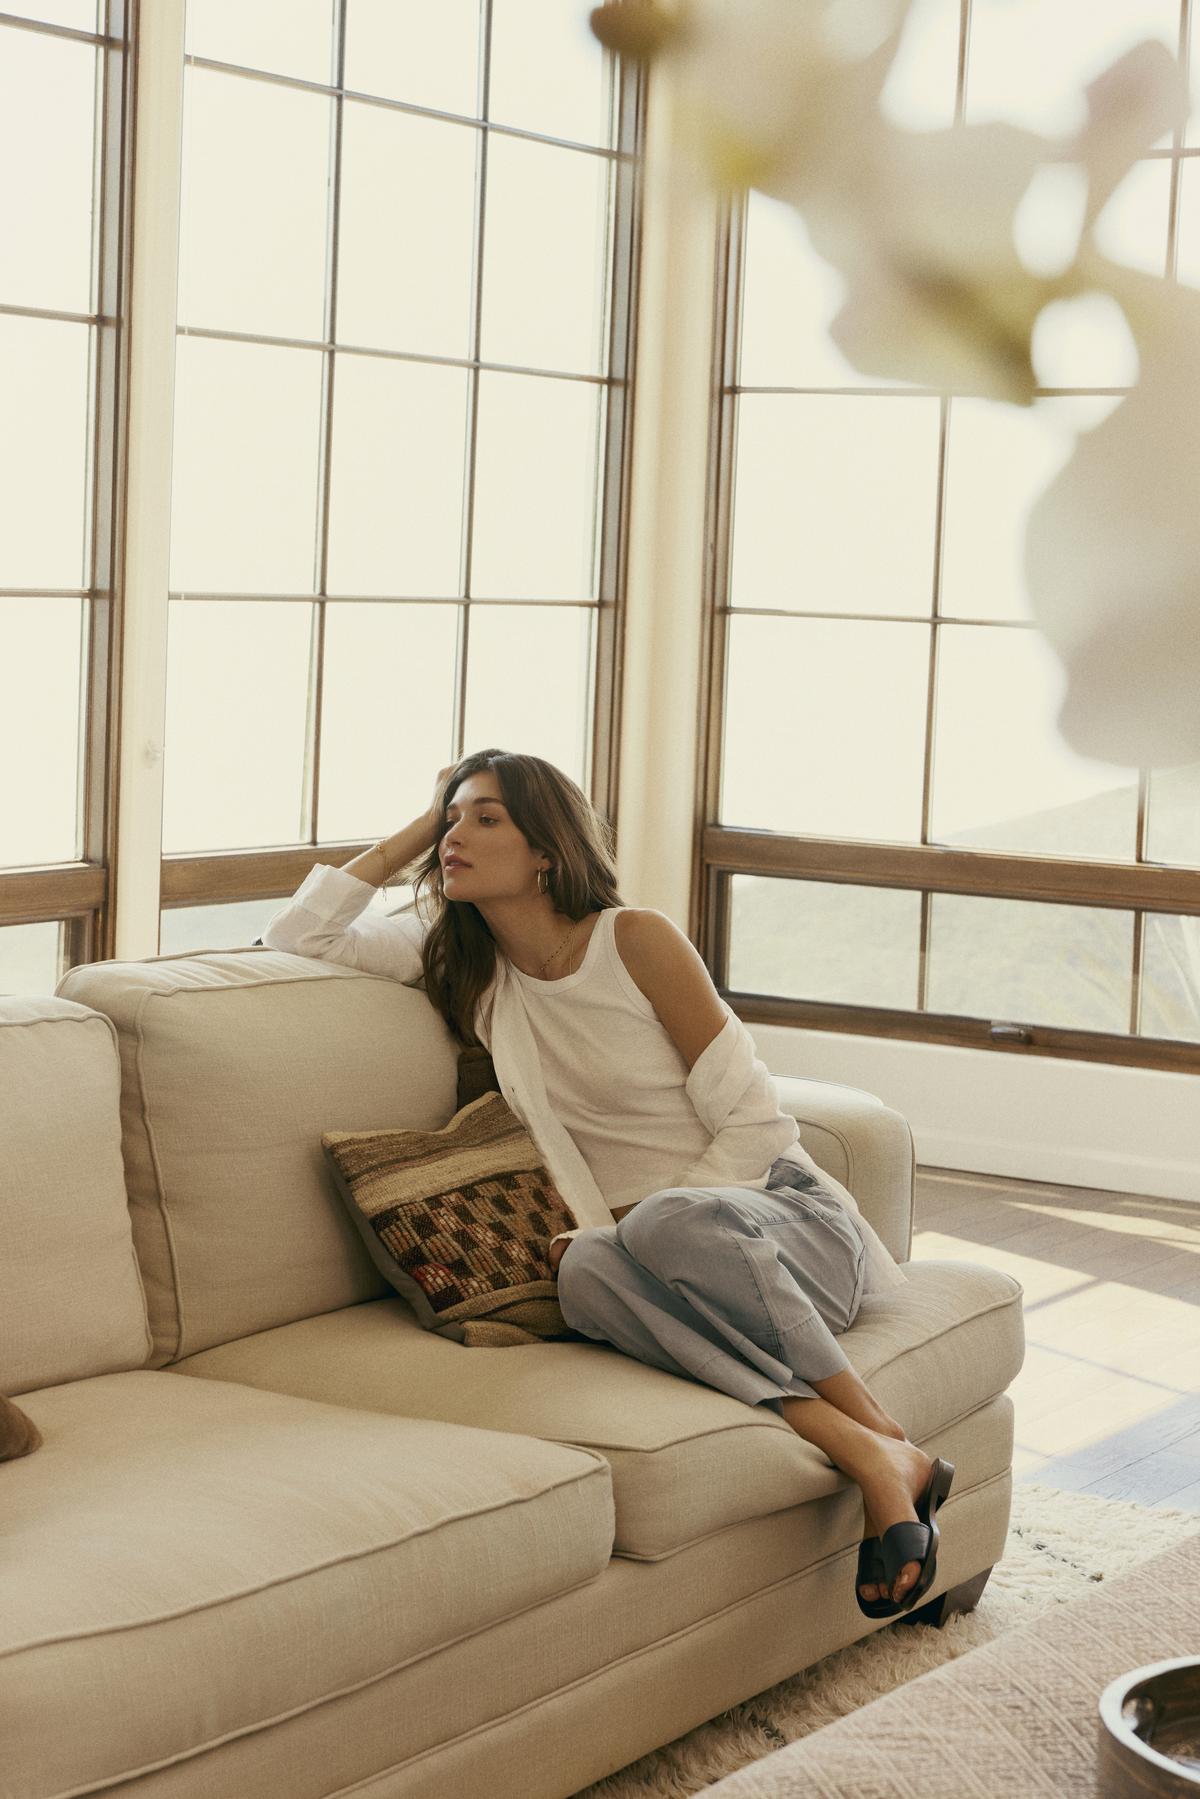   A woman in Velvet by Graham & Spencer's MYA COTTON CANVAS PANT lounges on a beige sofa beside large windows, looking pensive. 